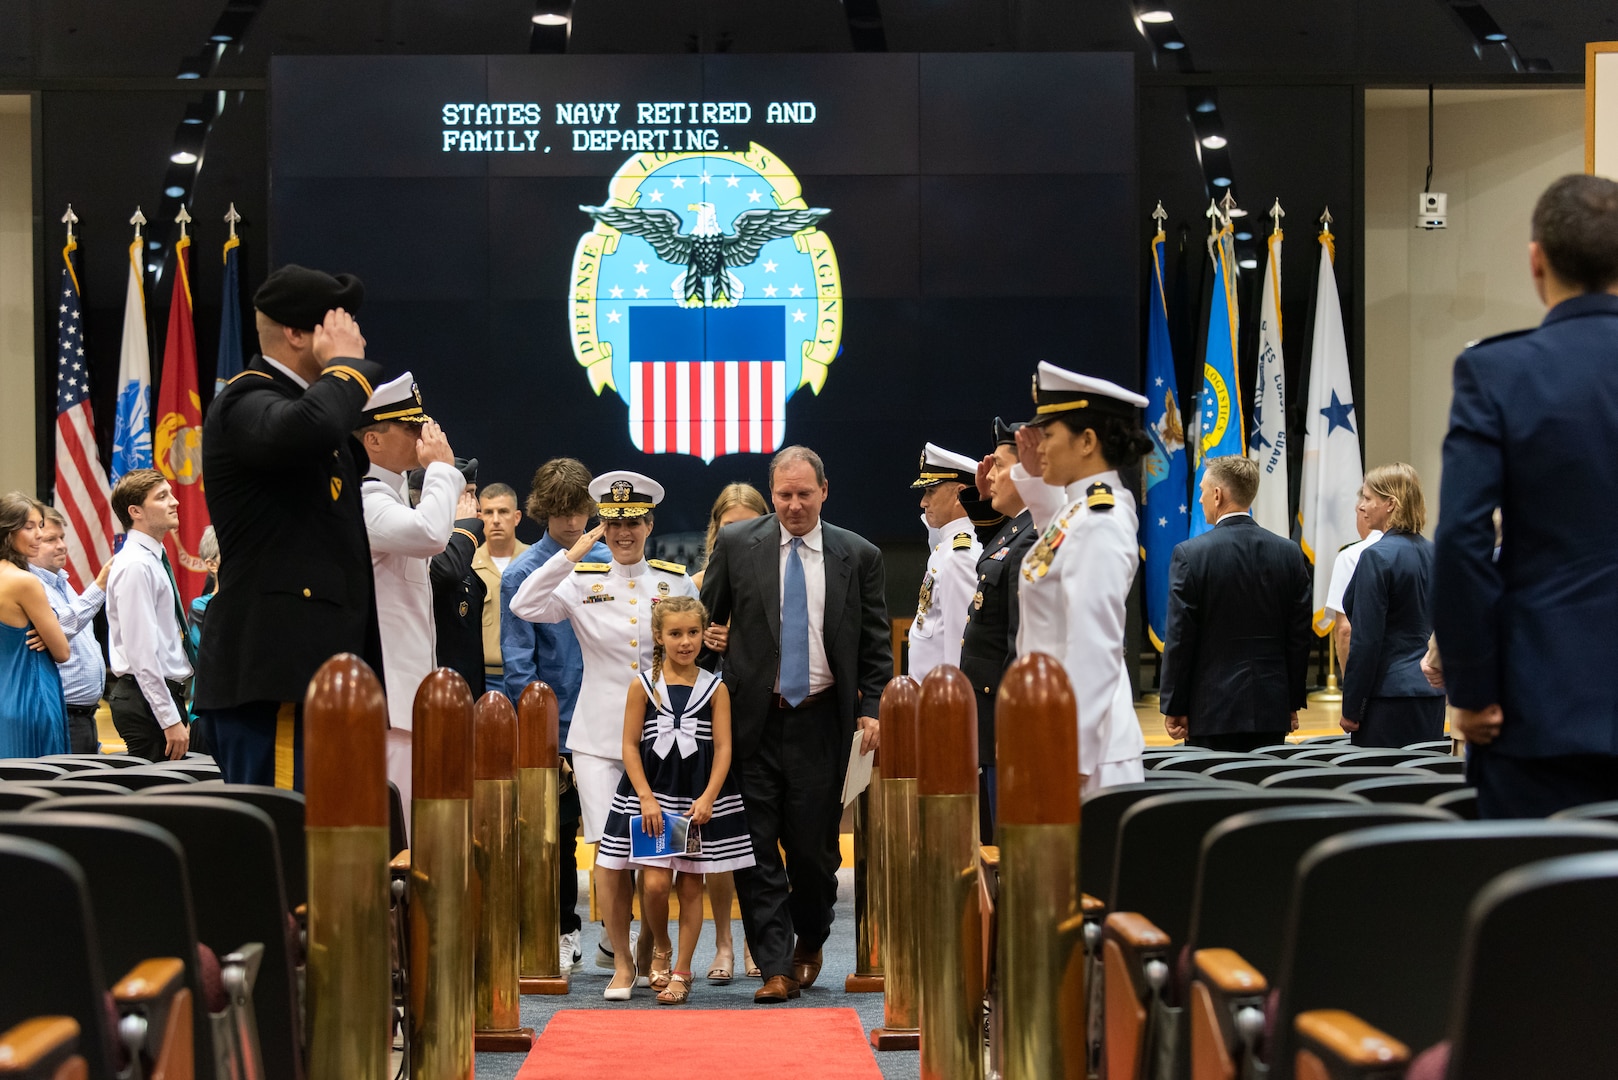 A woman in Navy dress whites is surrounded by her young daughter in a blue and white dress, a man in a dark suit with blue tie, a young adult male and female. They are walking down the aisle in an auditorium. She is saluting her Sideboys which is a group of military members flanking her on her right and left.